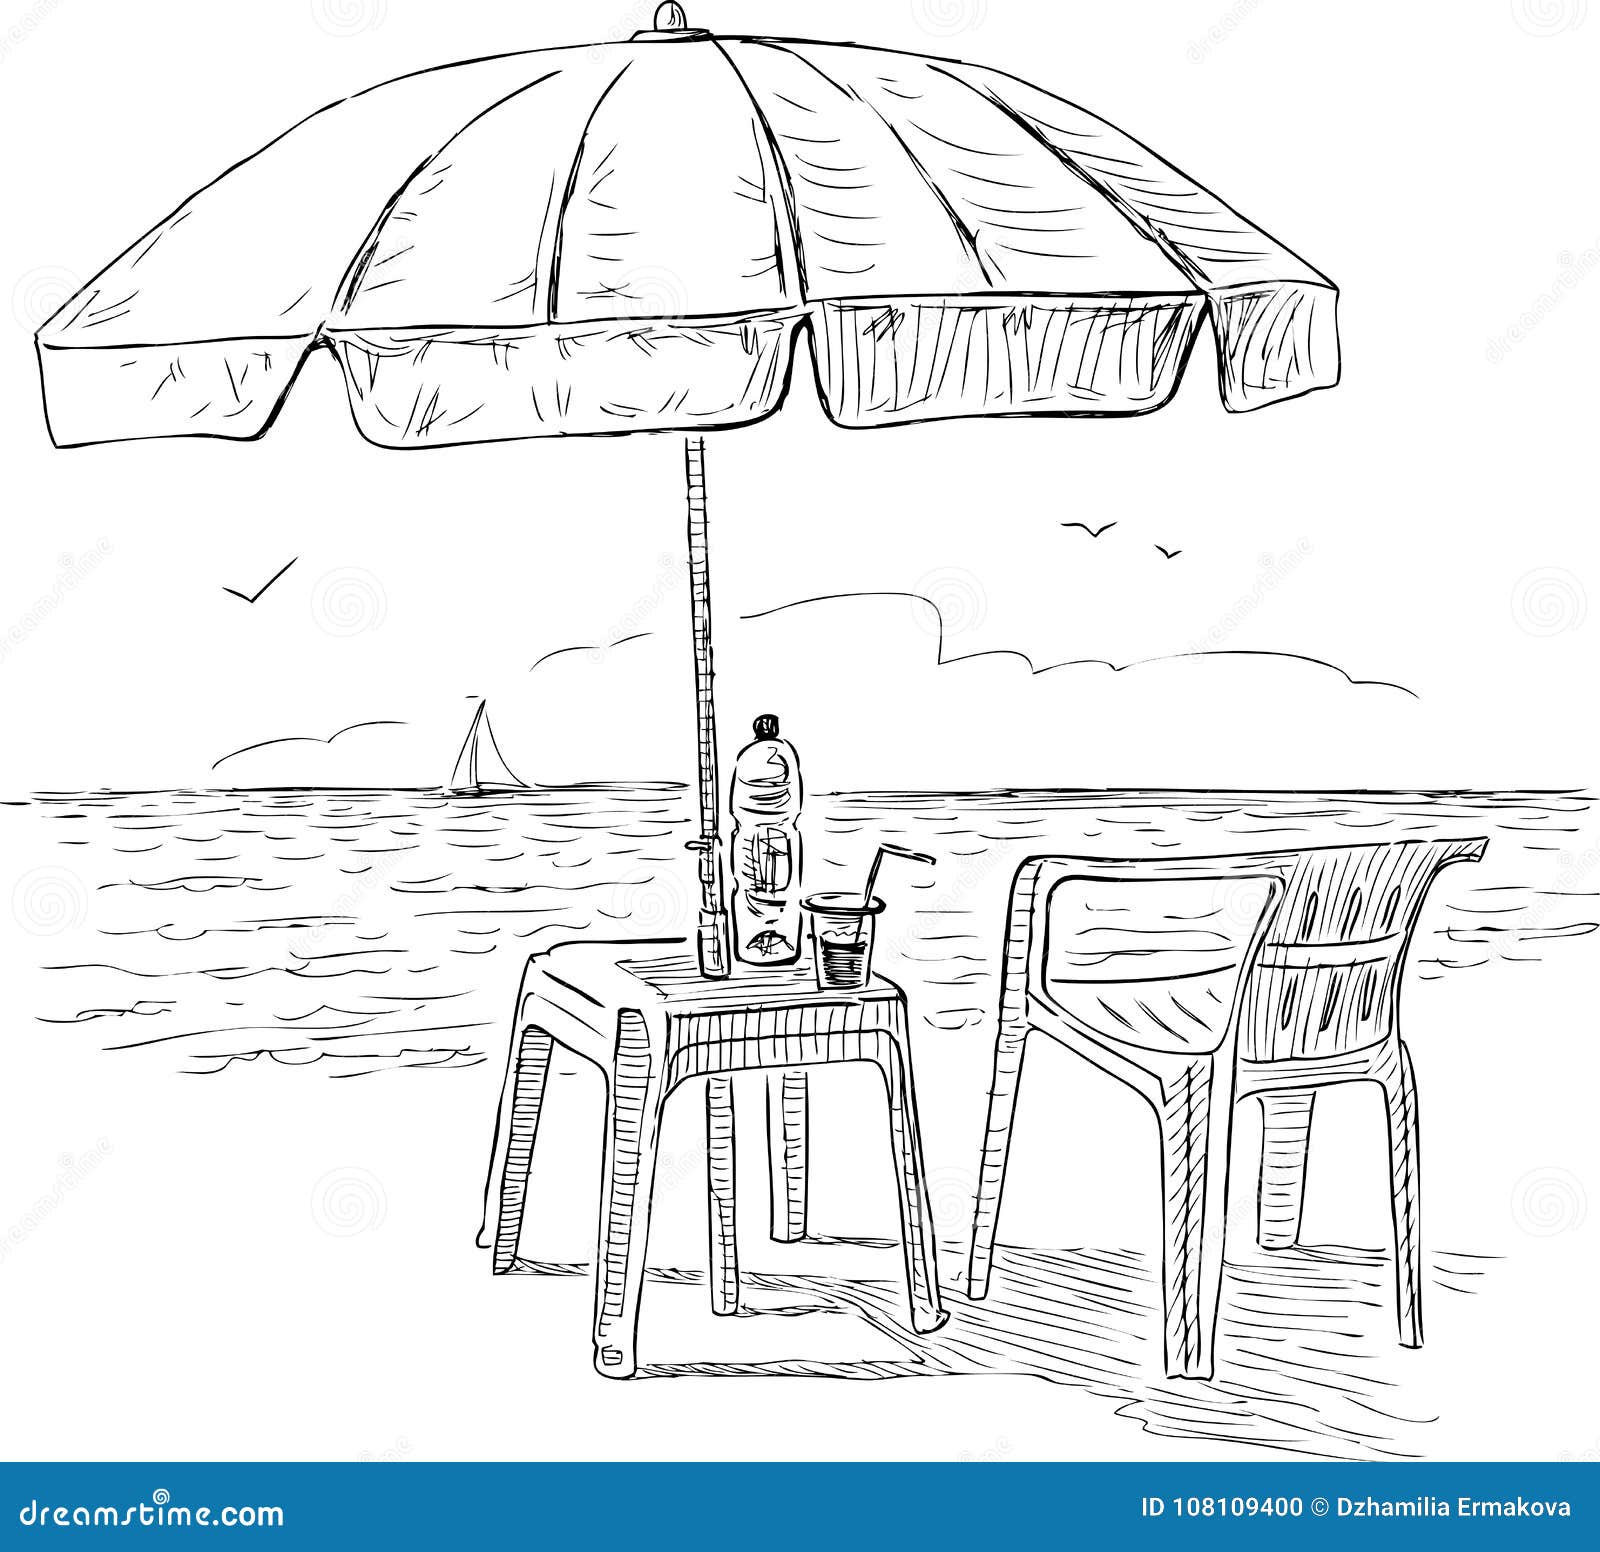 17,431 Beach Umbrella Drawing Royalty-Free Images, Stock Photos & Pictures  | Shutterstock